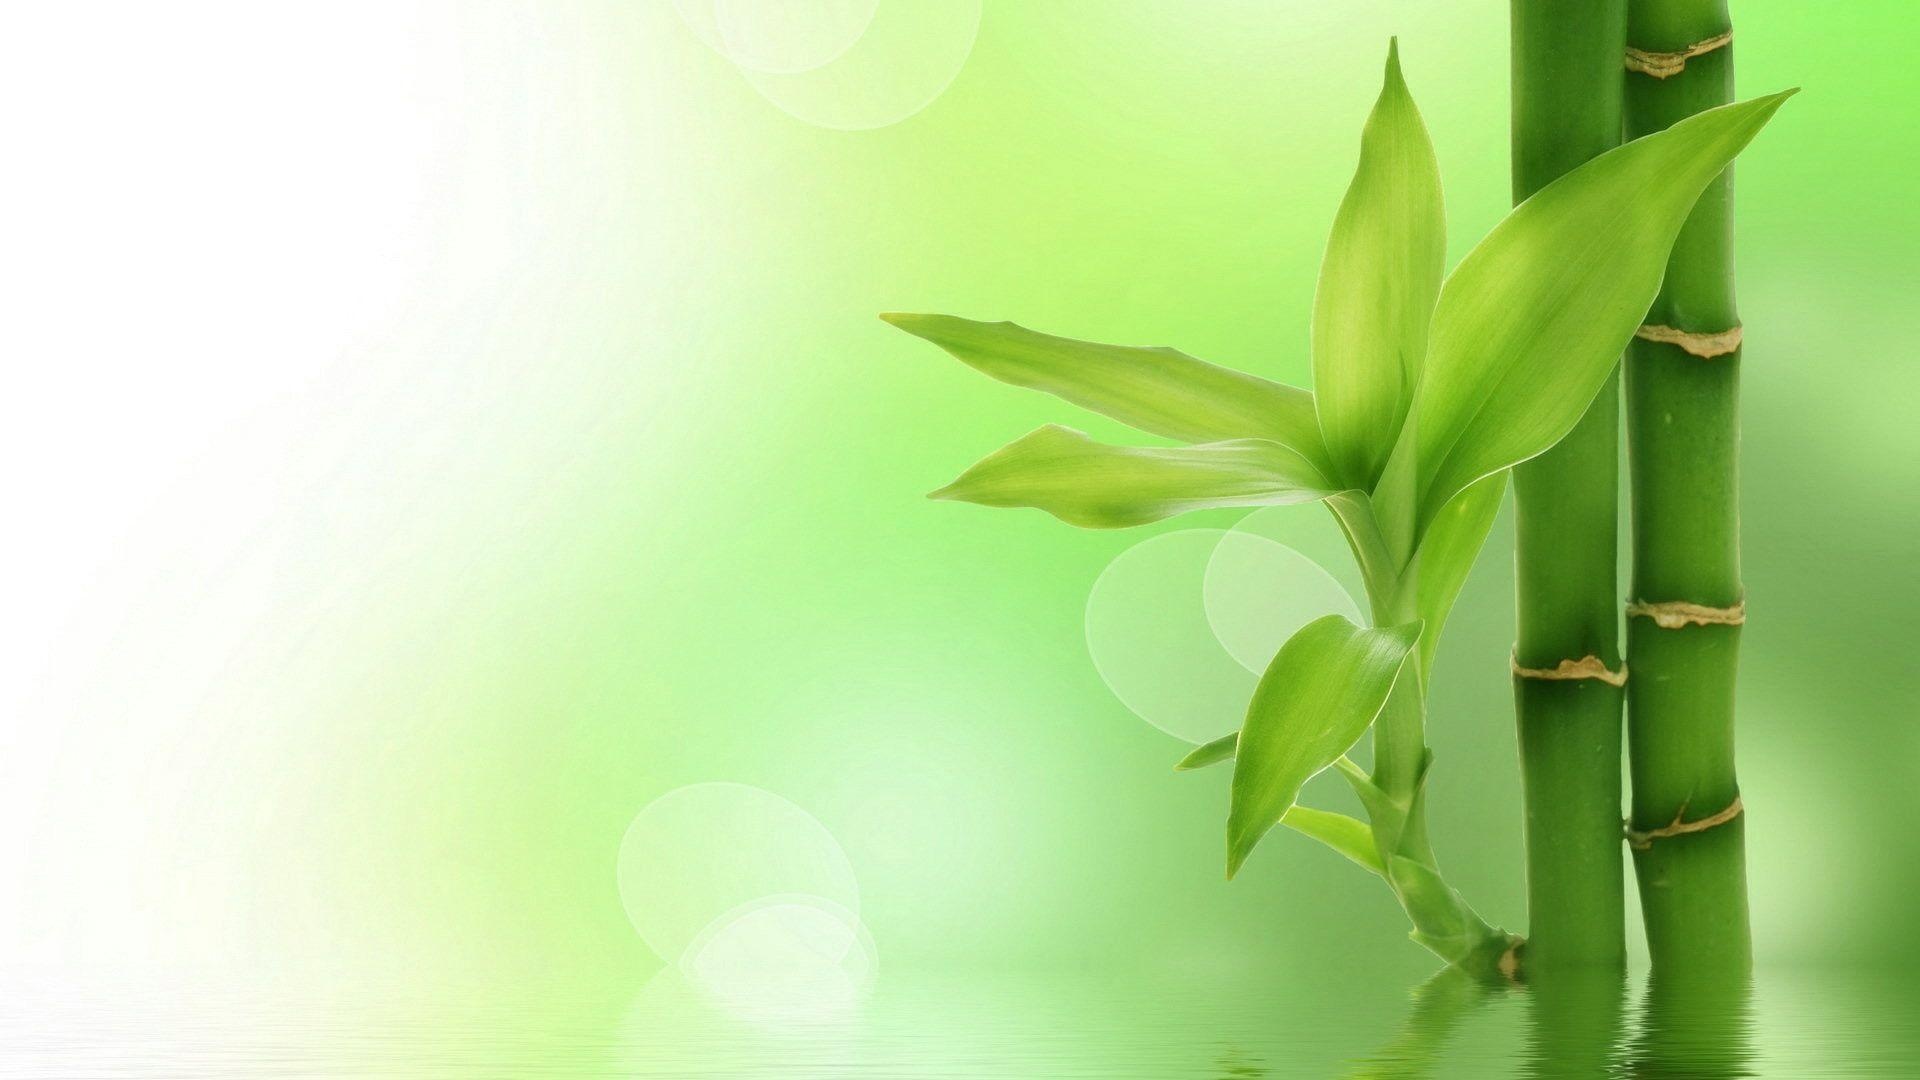 Bamboo: Evergreen perennial flowering plant, The largest member of the grass family. 1920x1080 Full HD Background.